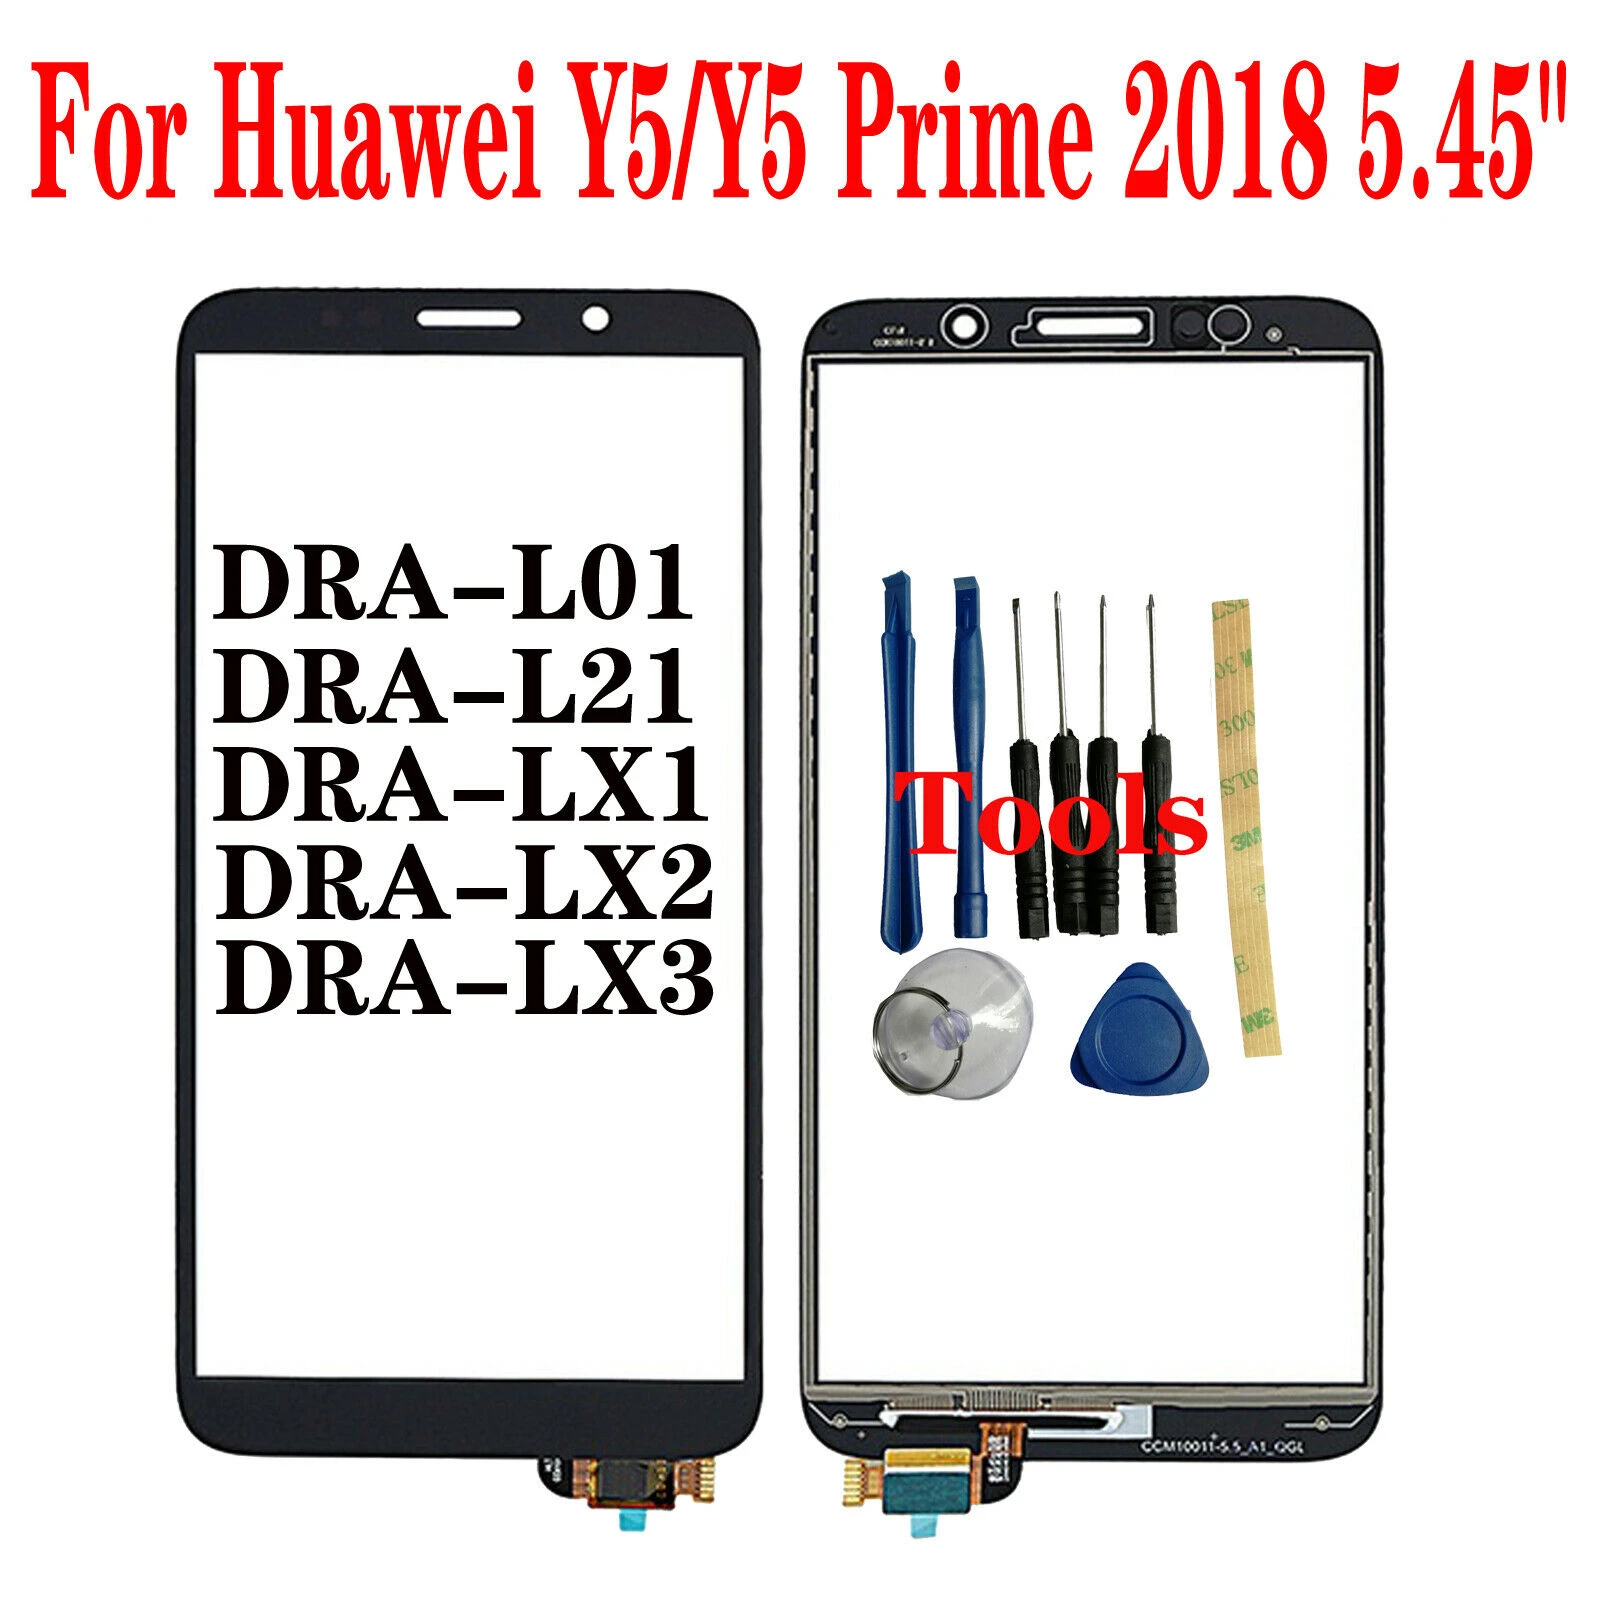 For Huawei Y5/y5 Prime 2018 Dra-l01 Dra-l21 Dra-lx2 Lx3 Outer Glass Touch  Screen - Mobile Phone Touch Panel - AliExpress